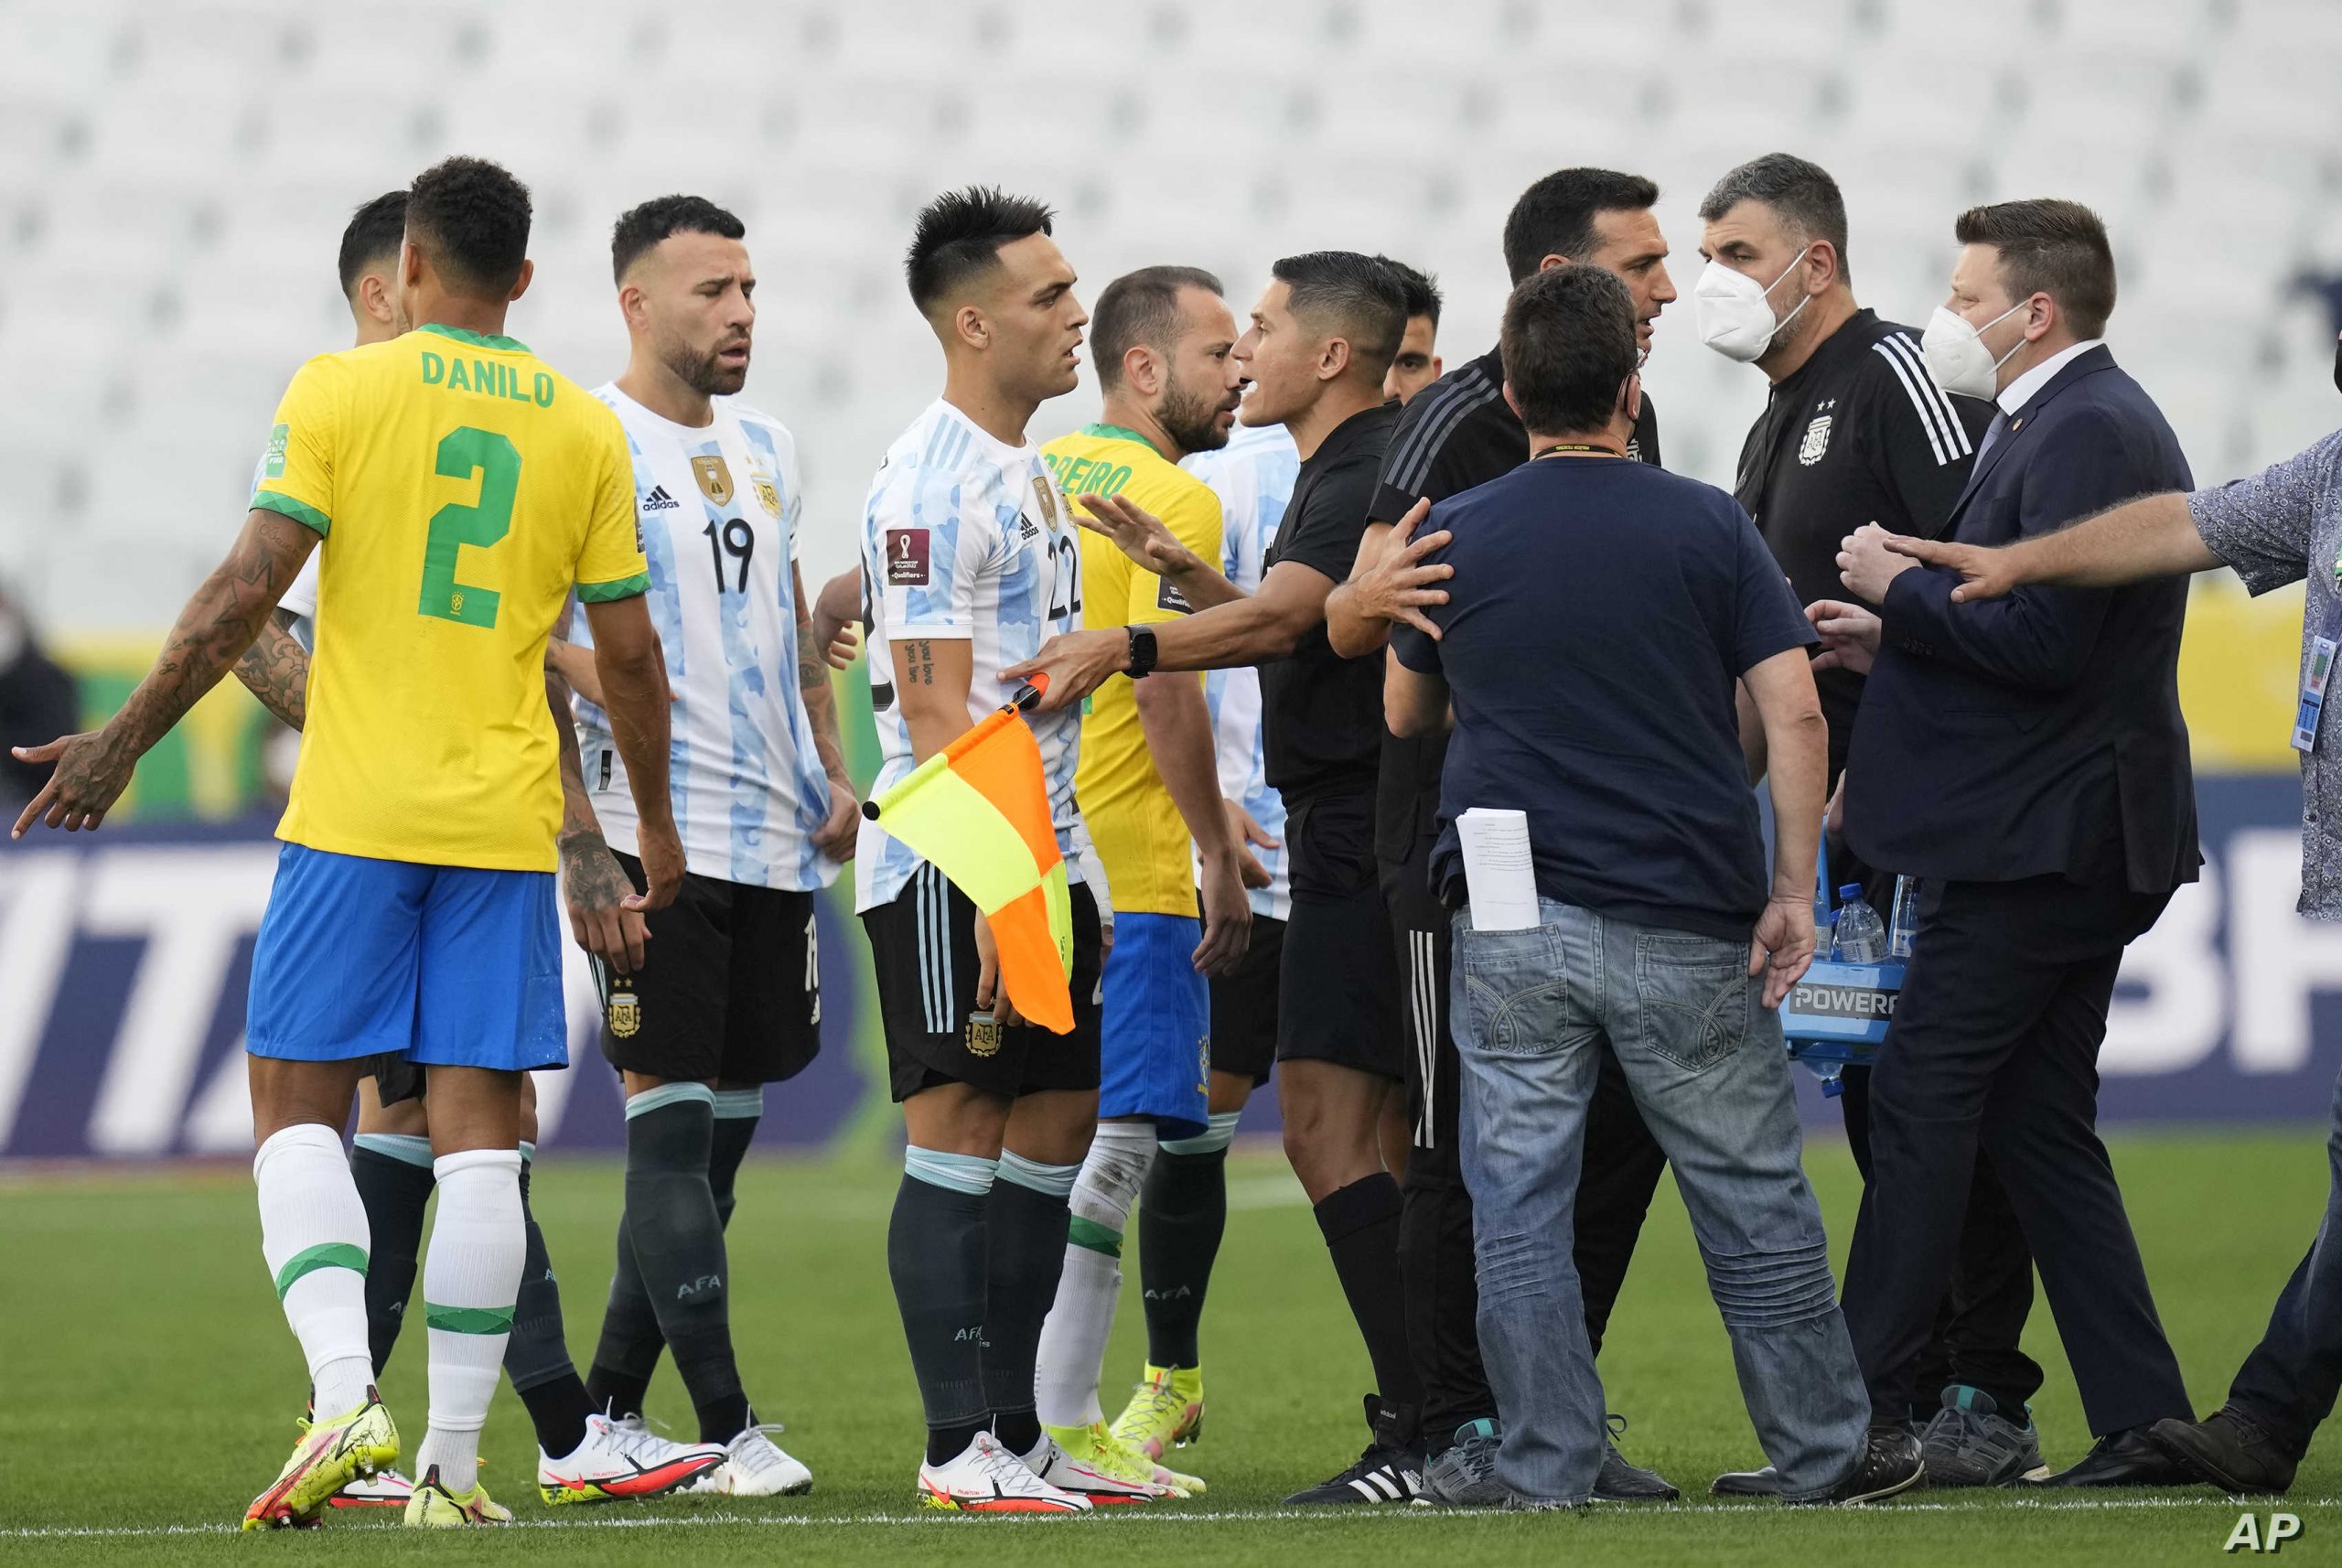 Brazil and Argentina's player talk as the soccer game is interrupted by health authorities during a qualifying soccer match for the FIFA World Cup Qatar 2022 at Neo Quimica Arena stadium in Sao Paulo, Brazil, Sunday, Sept.5, 2021. (AP Photo/Andre Penner)